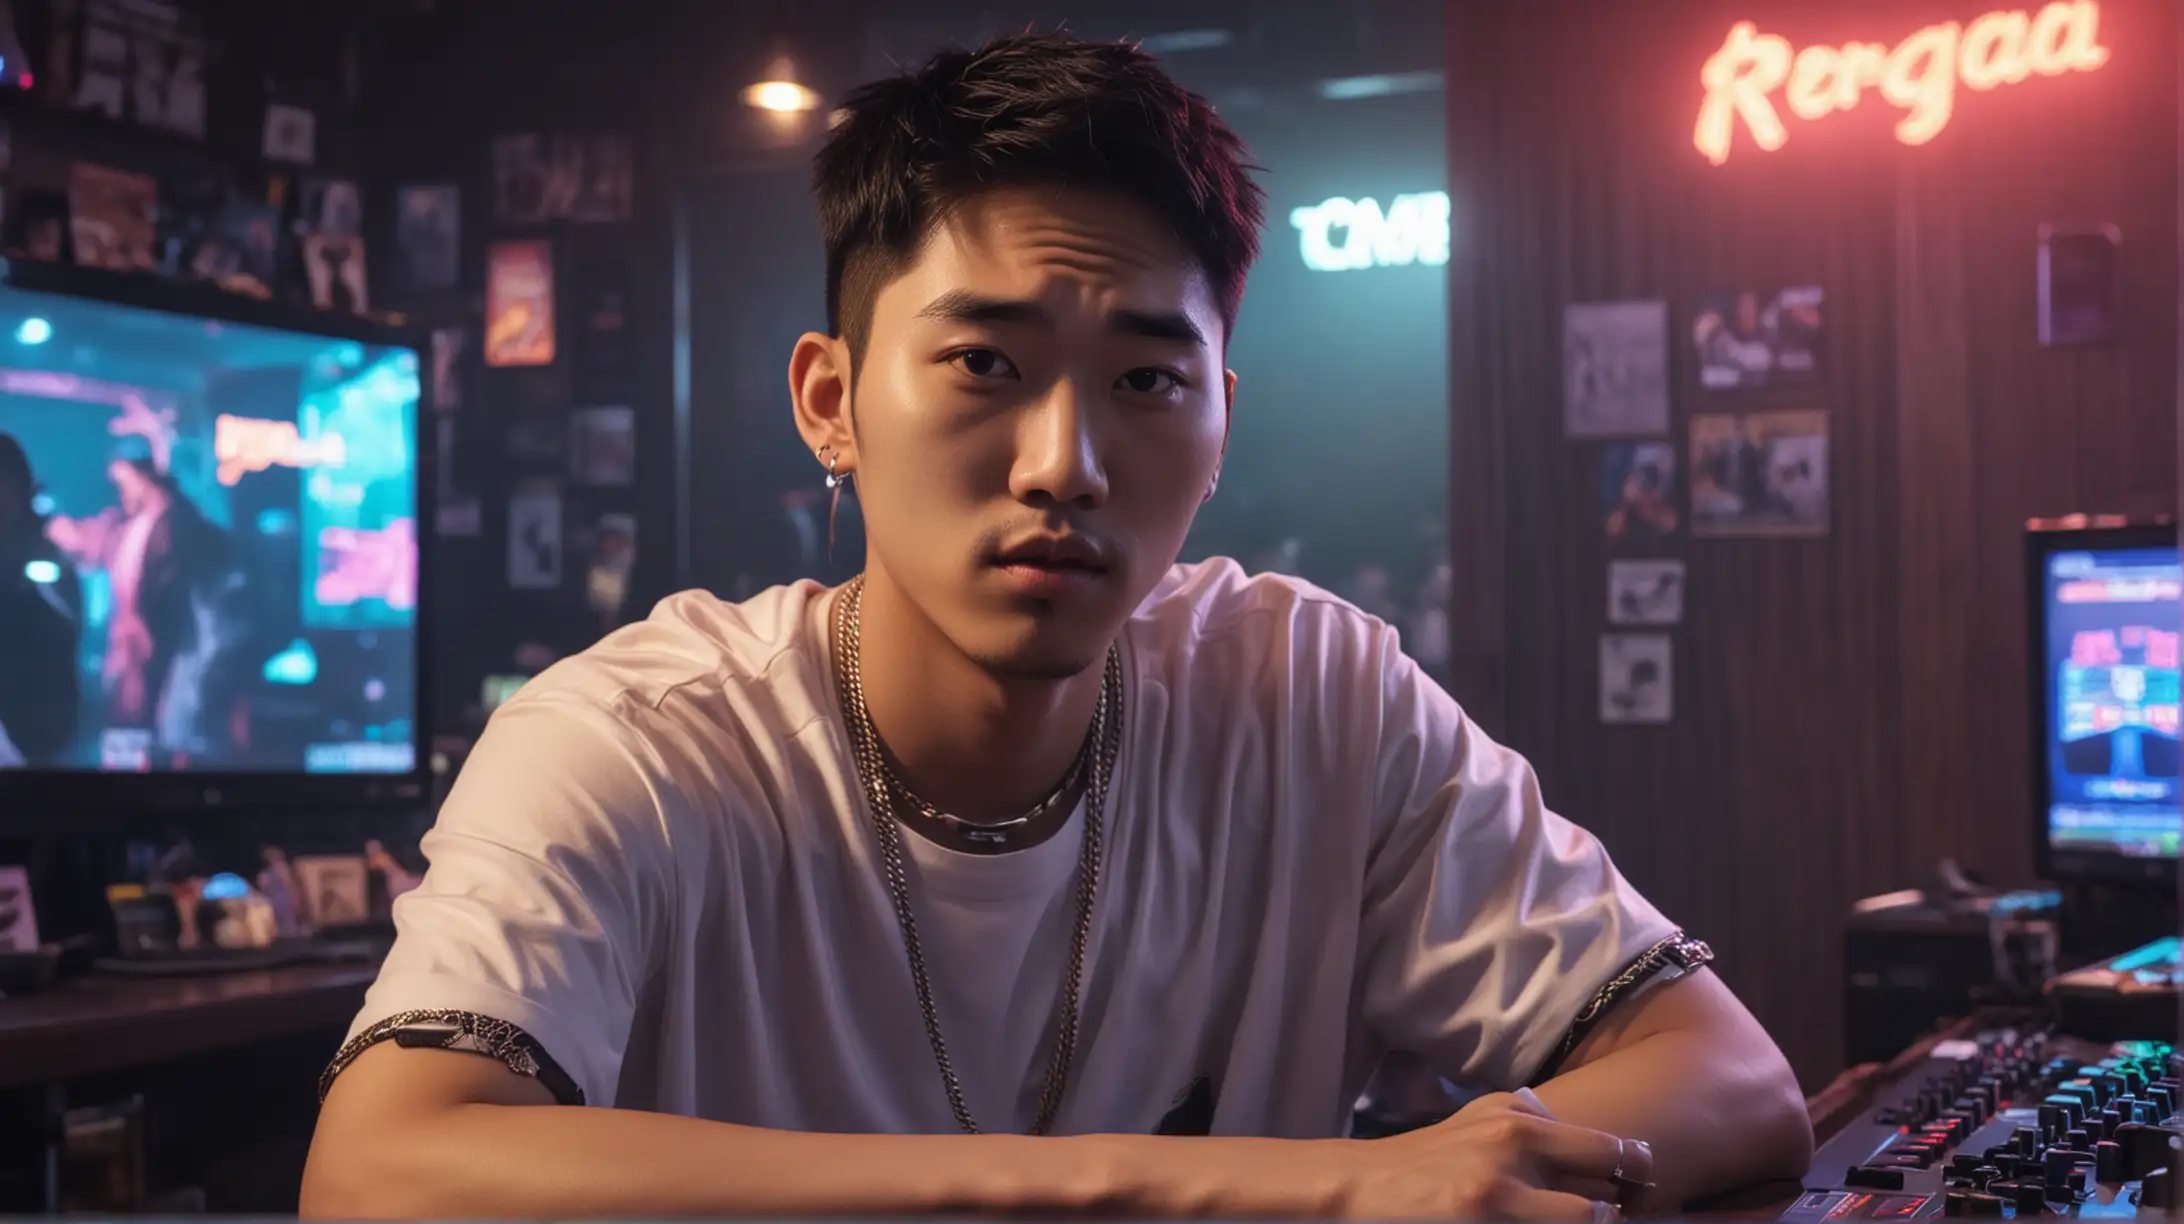 Generate an image of a hip young Korean man who likes rap music, sitting at his desk in a small Georgia strip club.